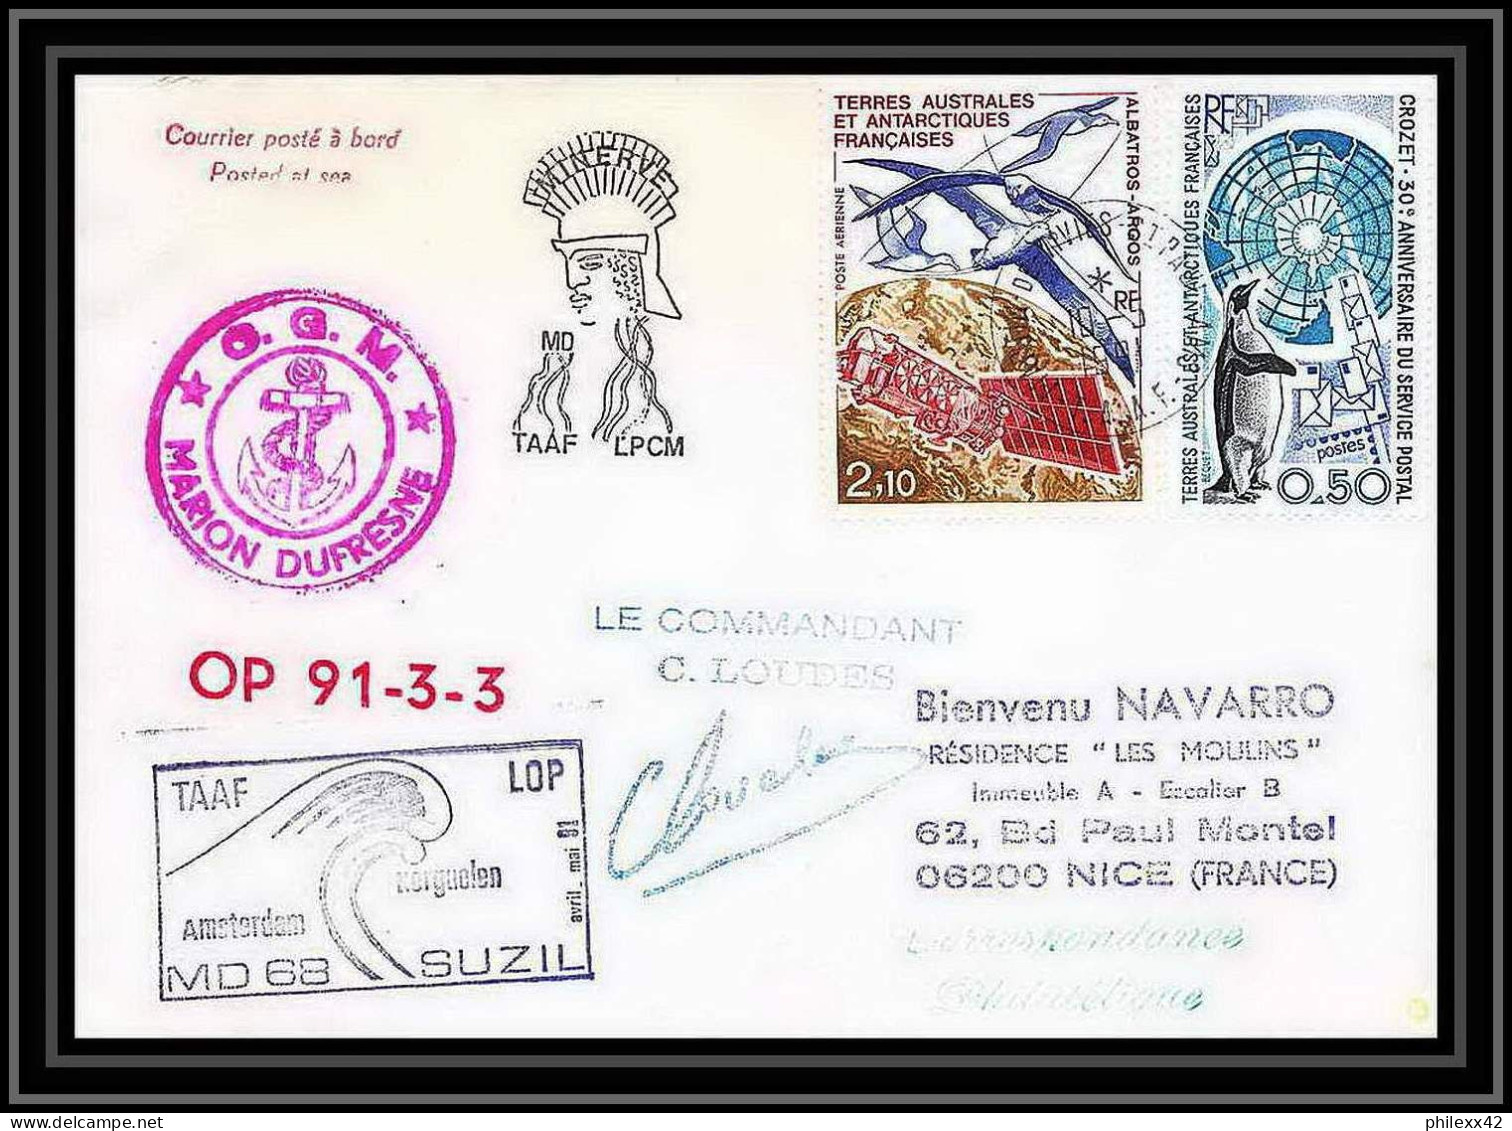 1764 Md 68 Op 91-3-3 Suzil Signé Signed Loudes Marion Dufresne 4/5/1991 TAAF Antarctic Terres Australes Lettre (cover) - Antarktis-Expeditionen